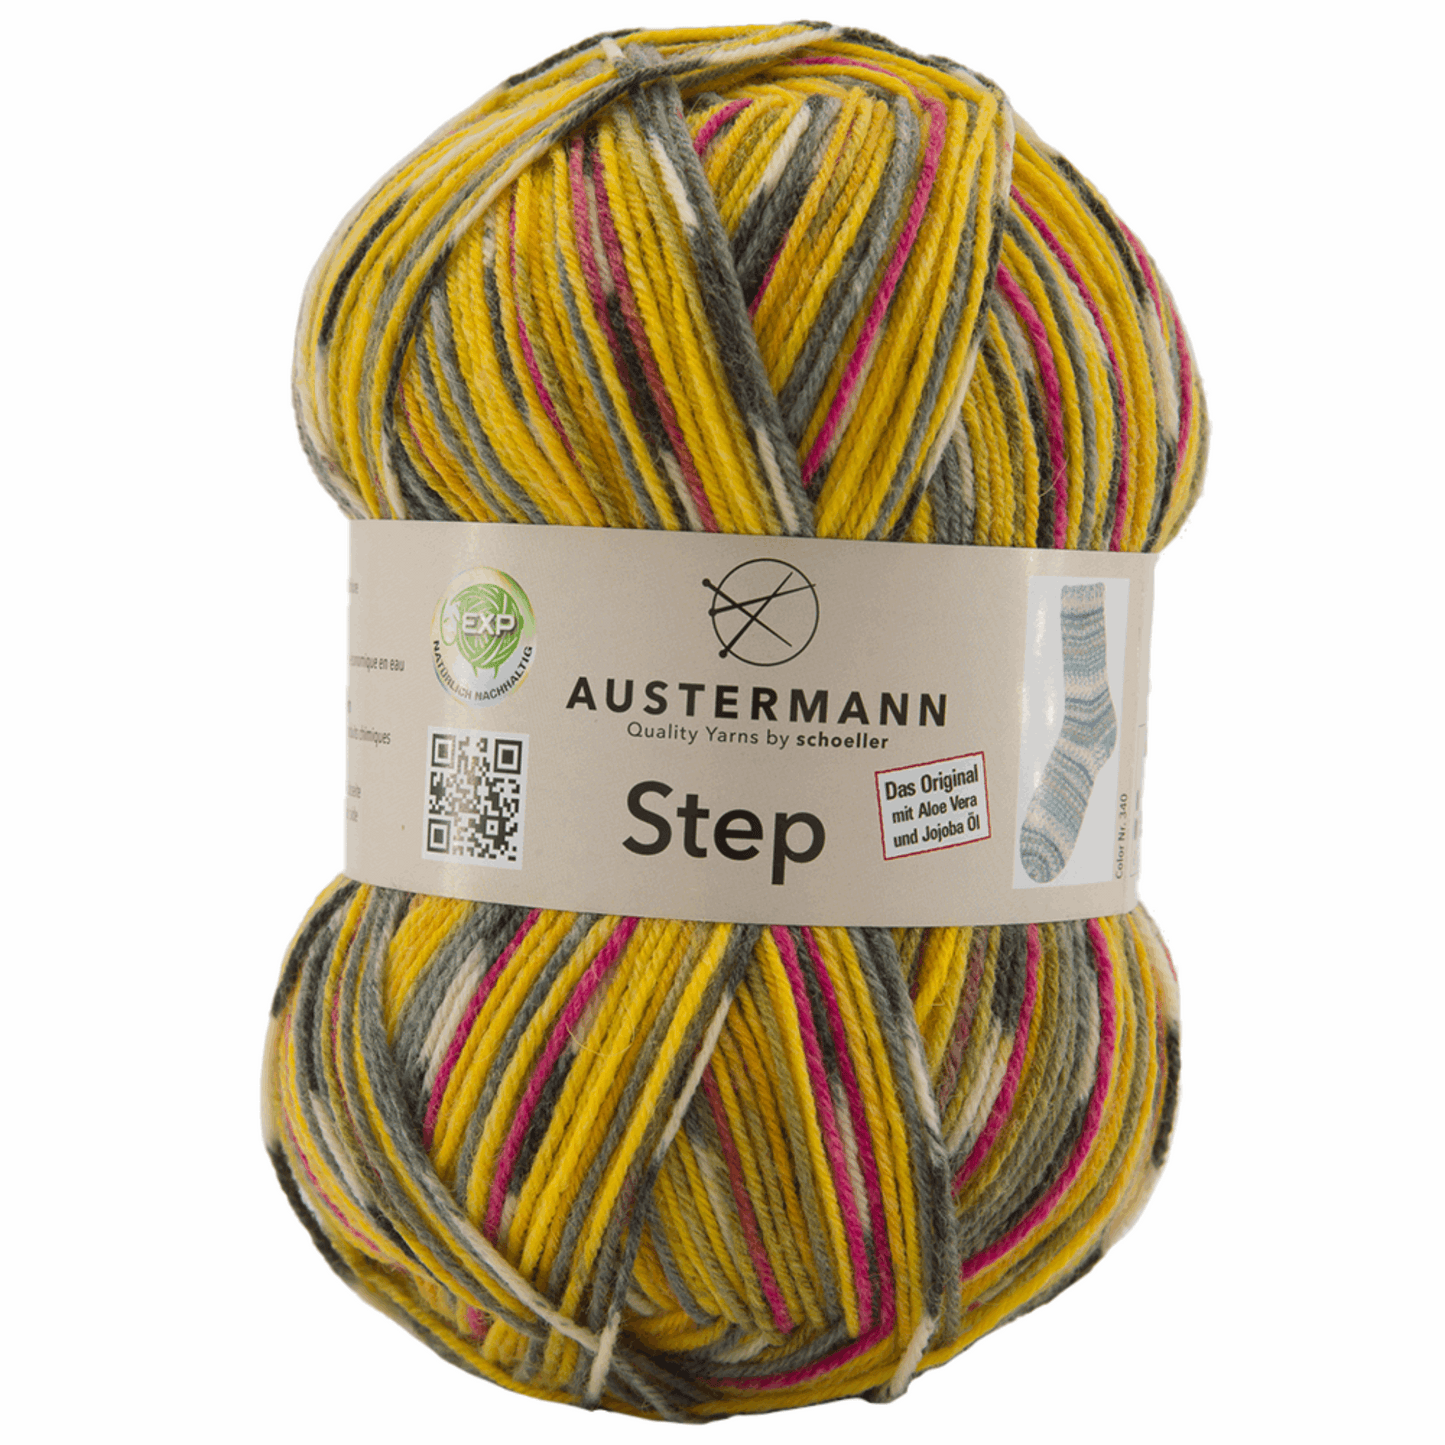 Austermann Step 4F Color 100g, 97689, Farbe sonne-pink 259